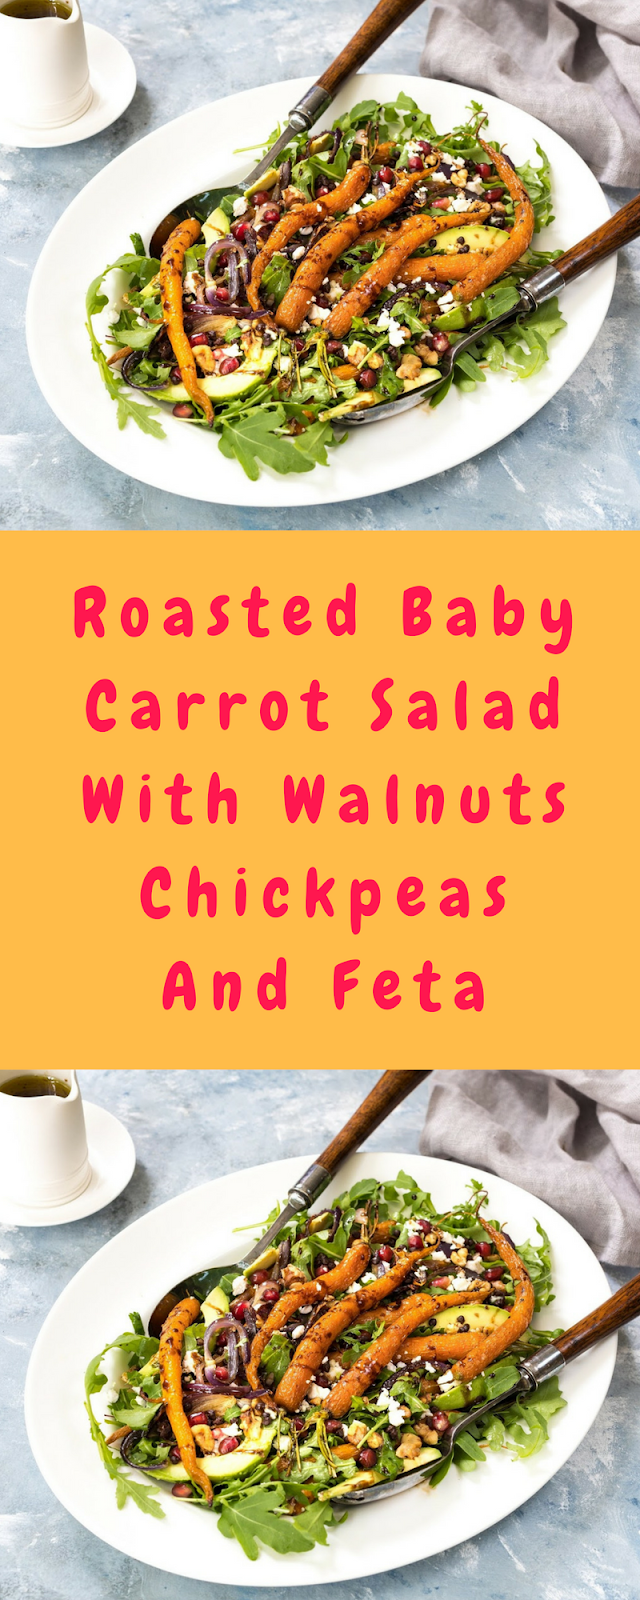 Roasted Baby Carrot Salad With Walnuts, Chickpeas And Feta